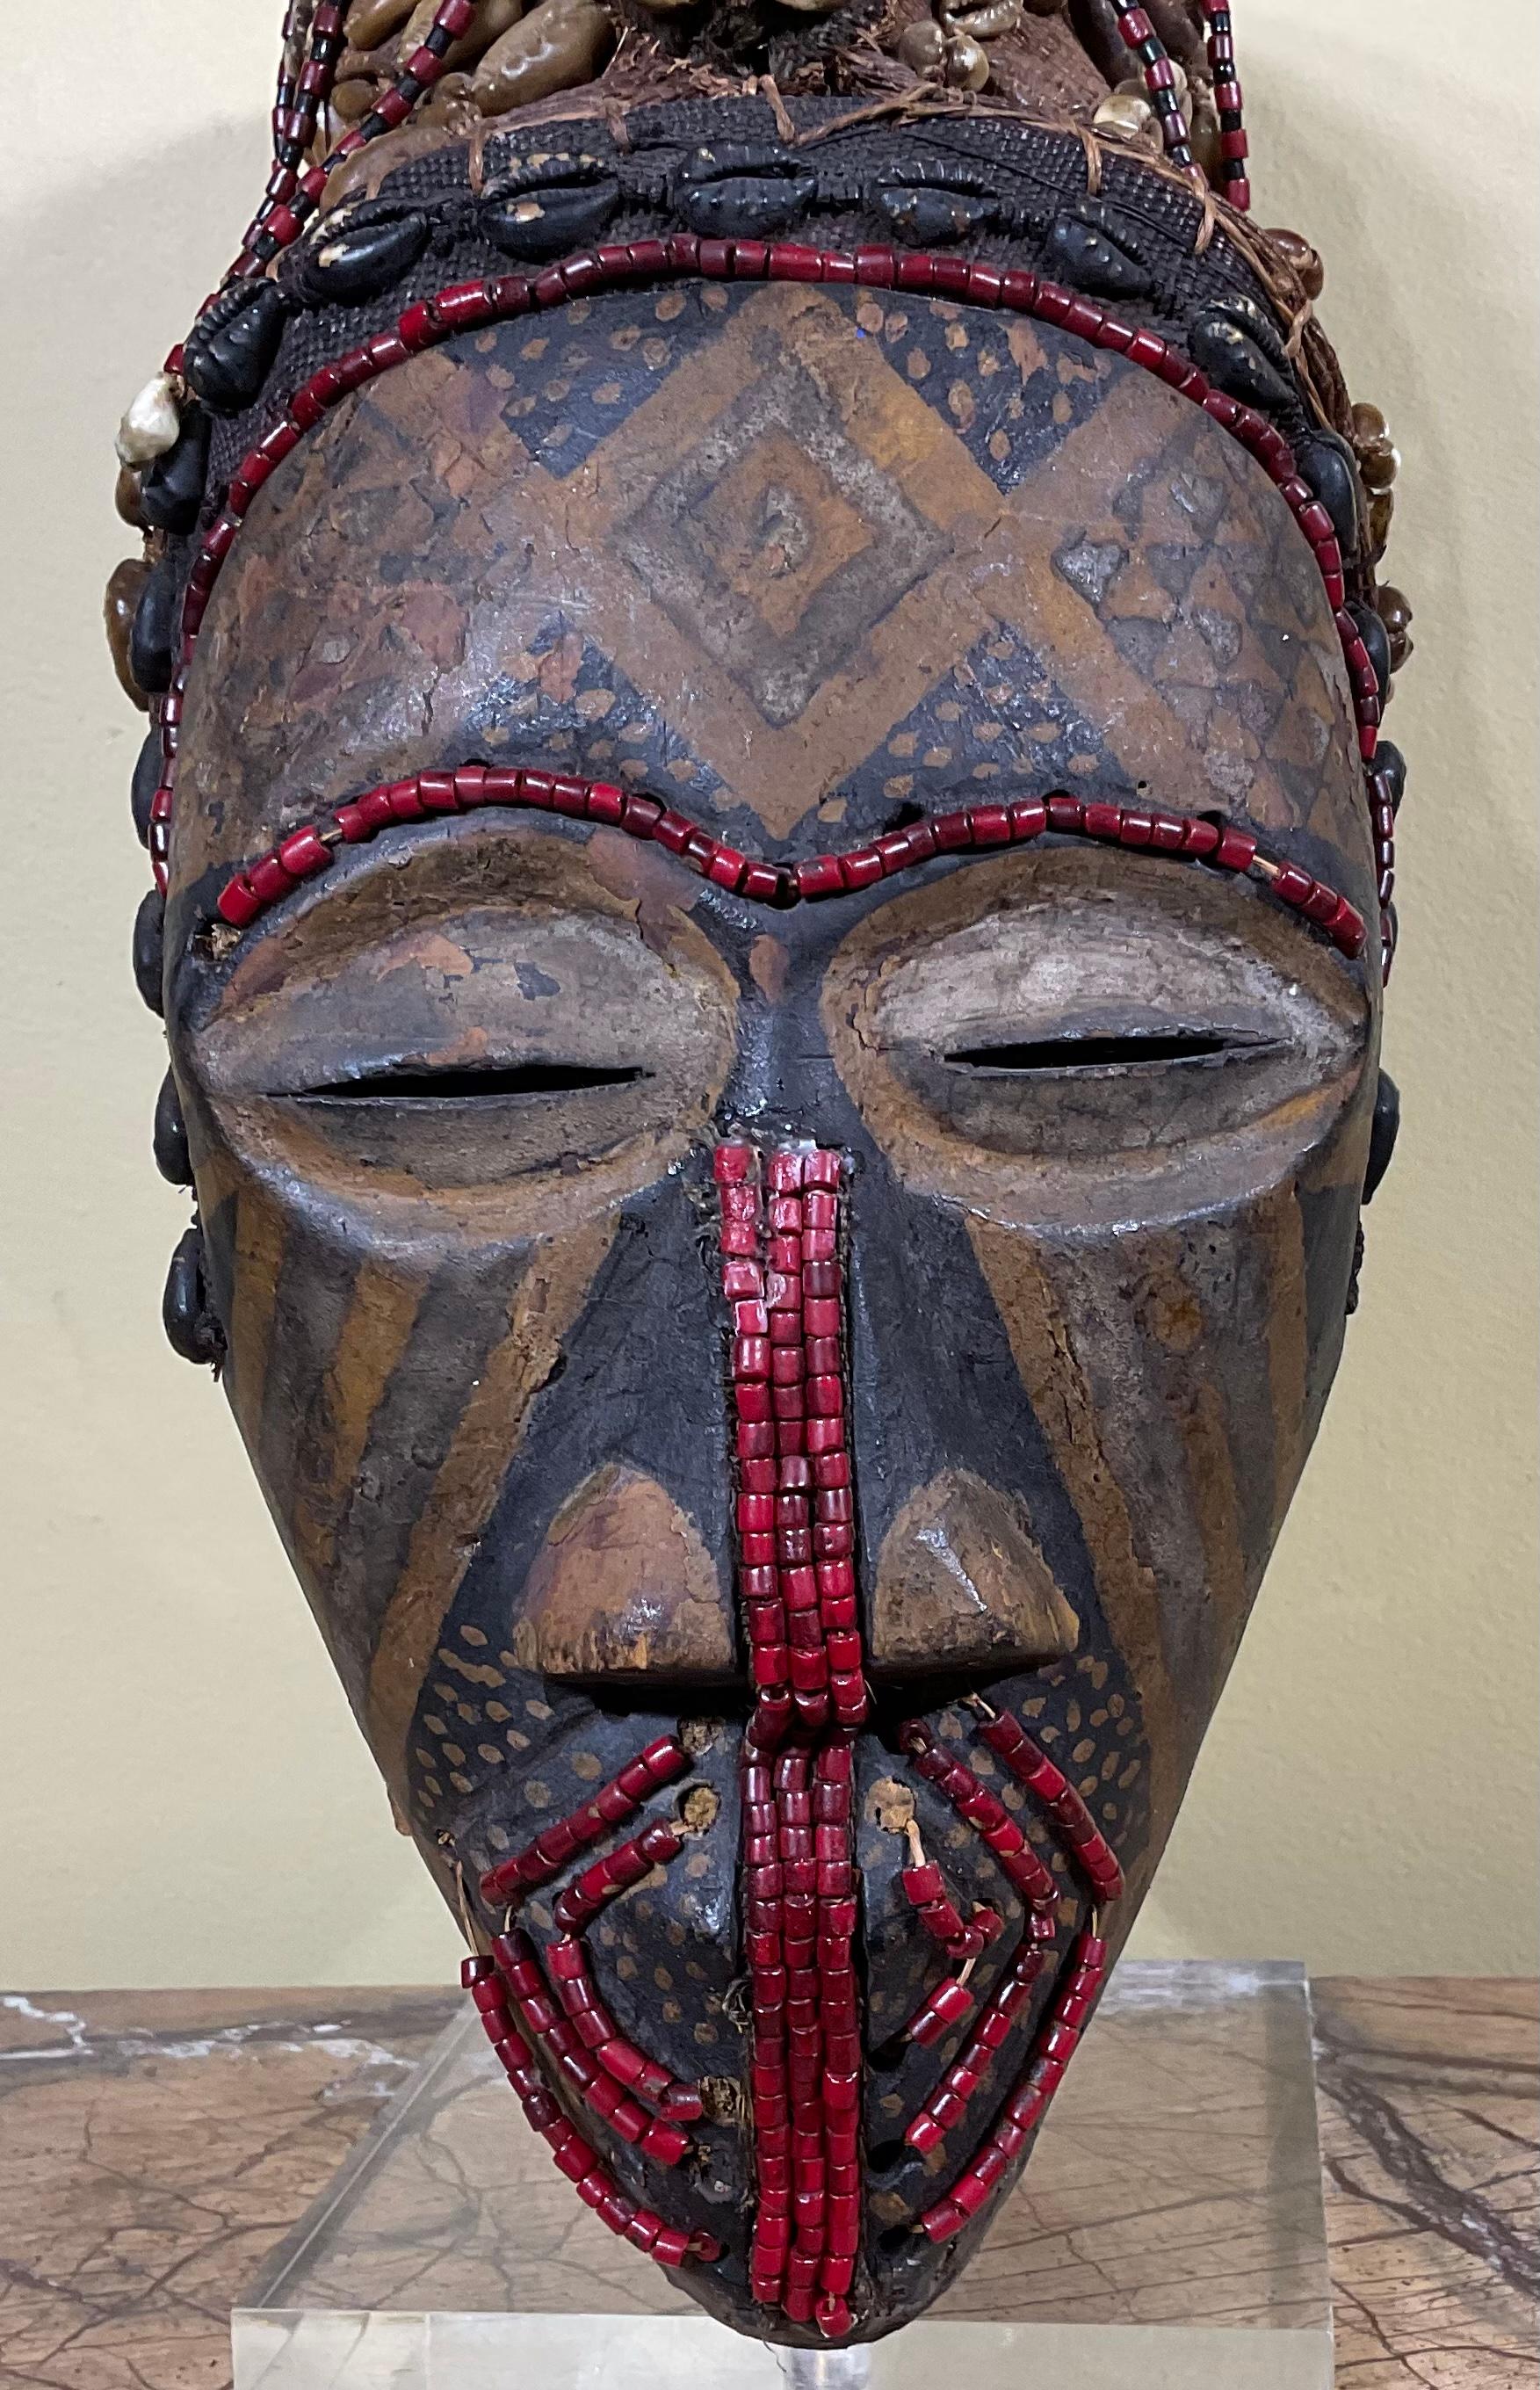 Exceptional looking mask artistically made of combination of hand crafted beads ,shells ,raffia, and hand painted wood. To make such a complete object of art for display.
Custom-made base included.
 